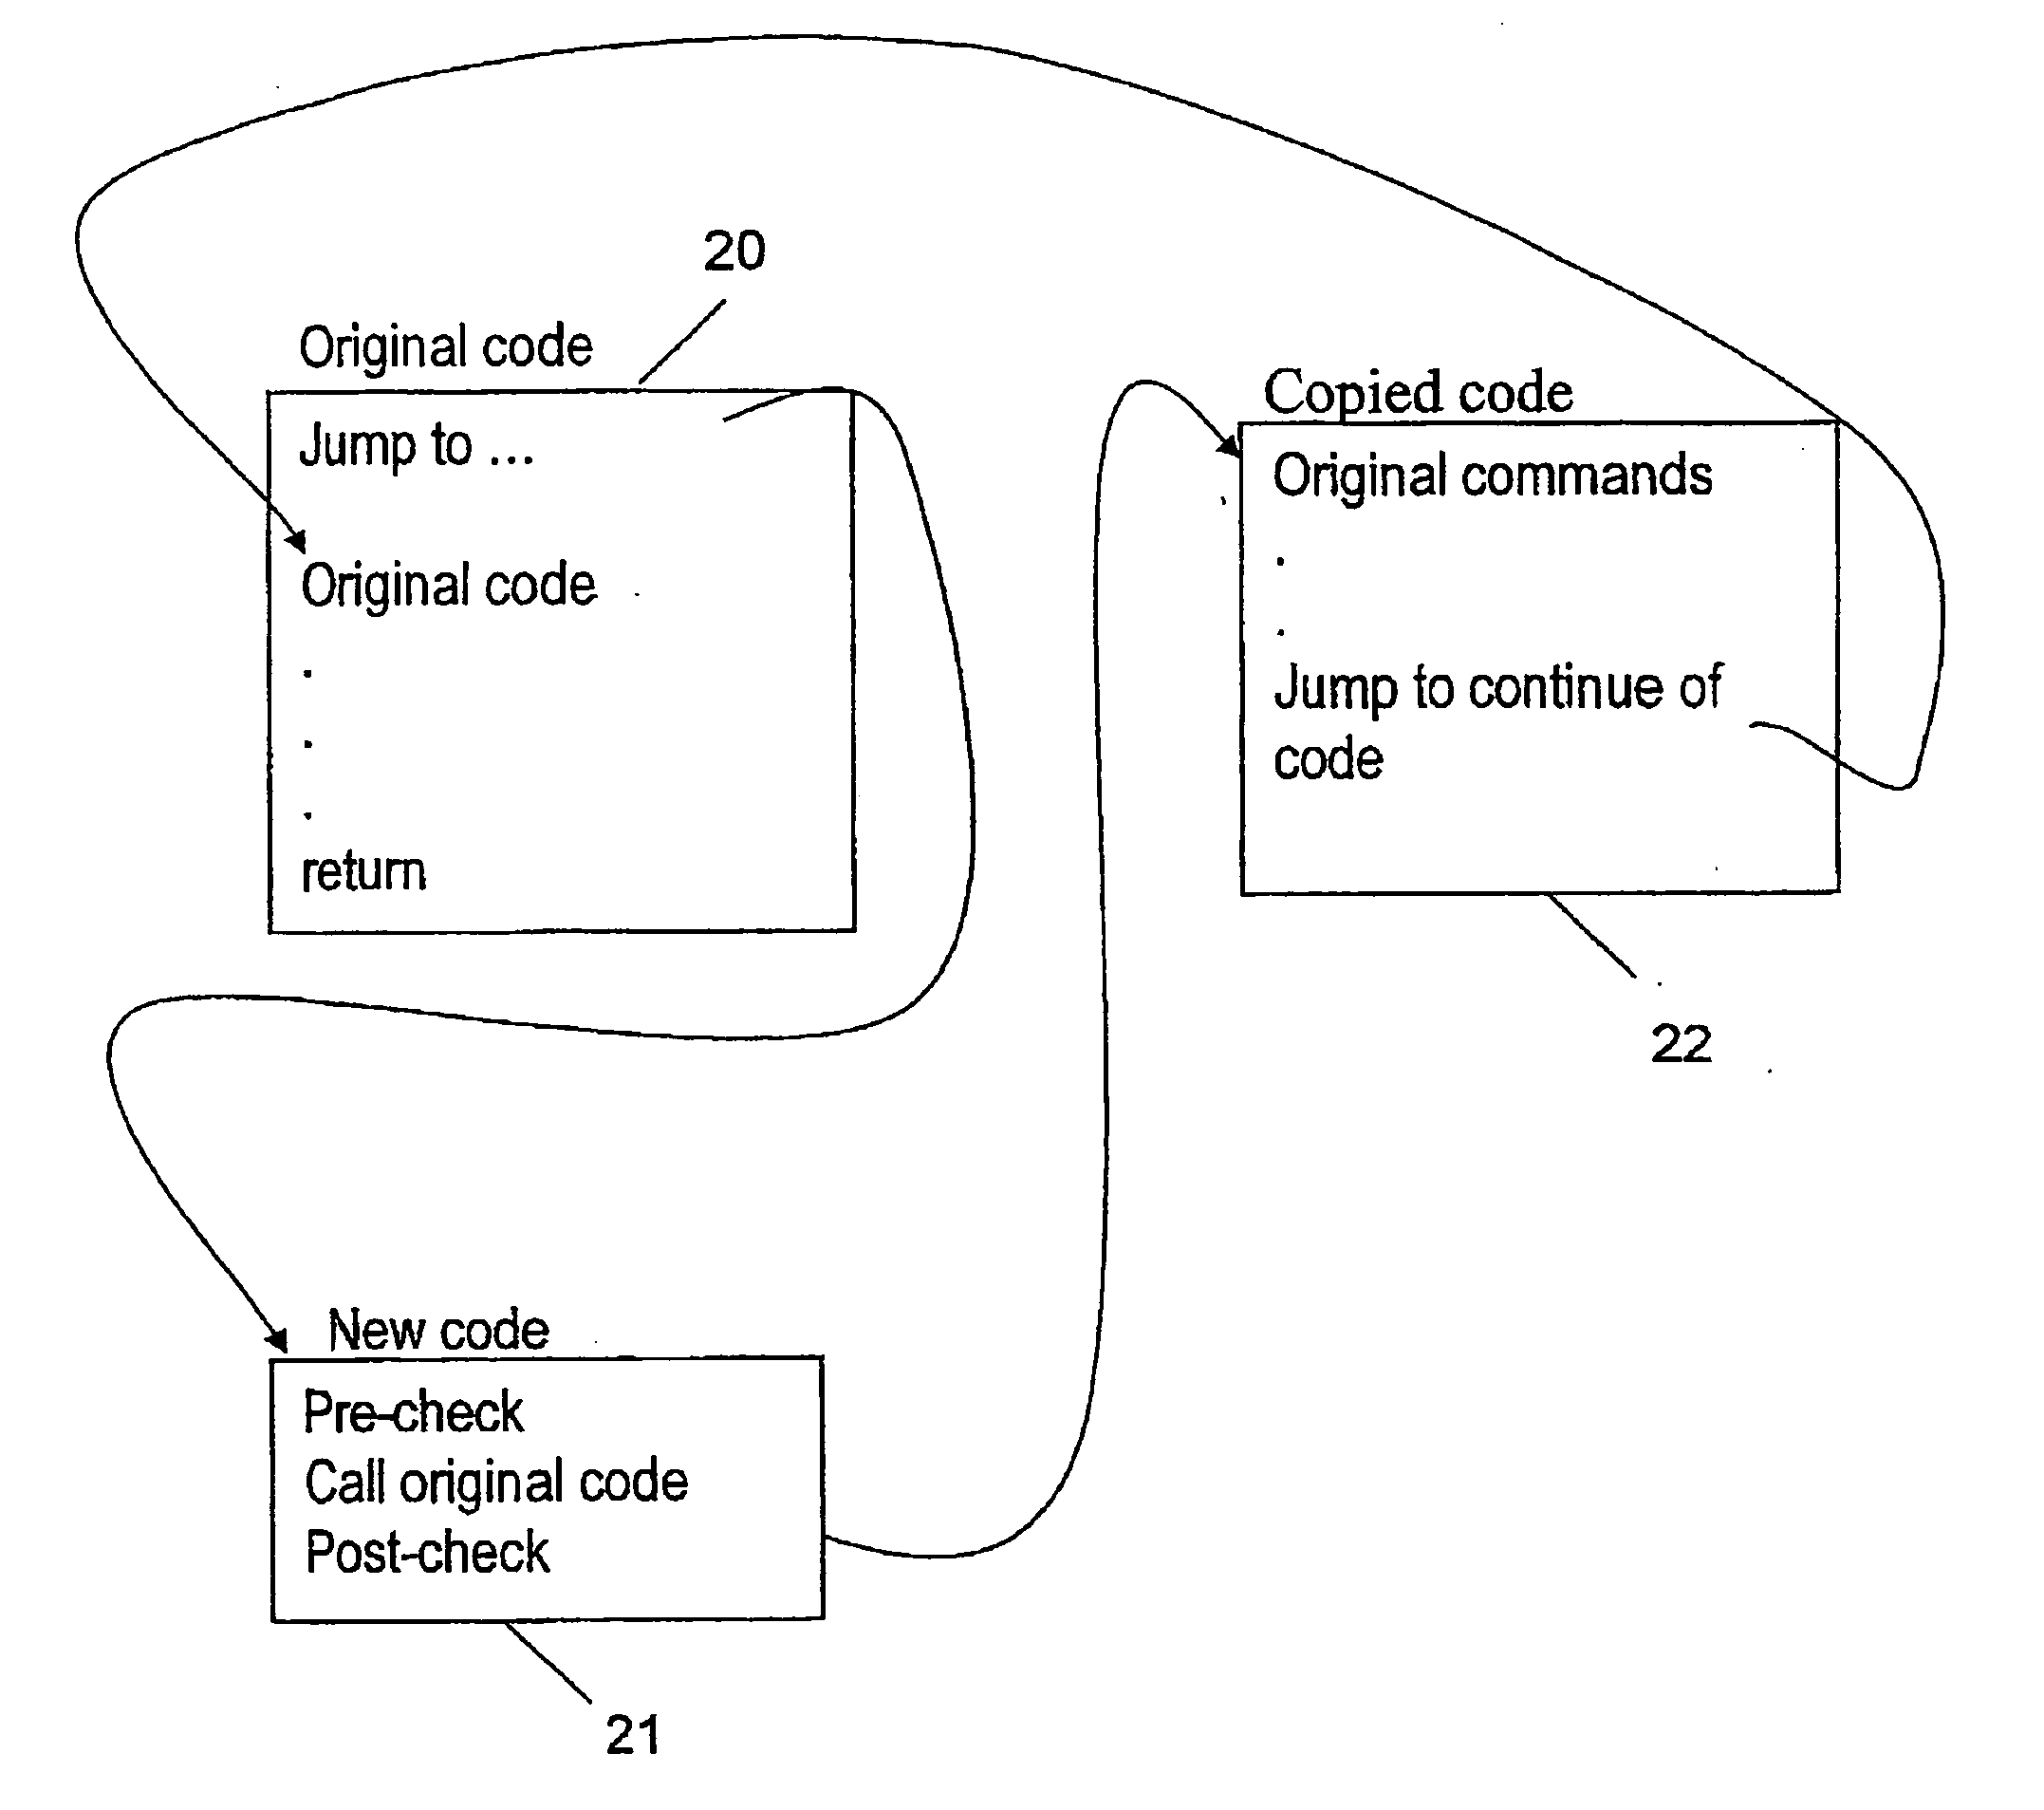 Method for dynamically allocating and managing resources in a computerized system having multiple consumers